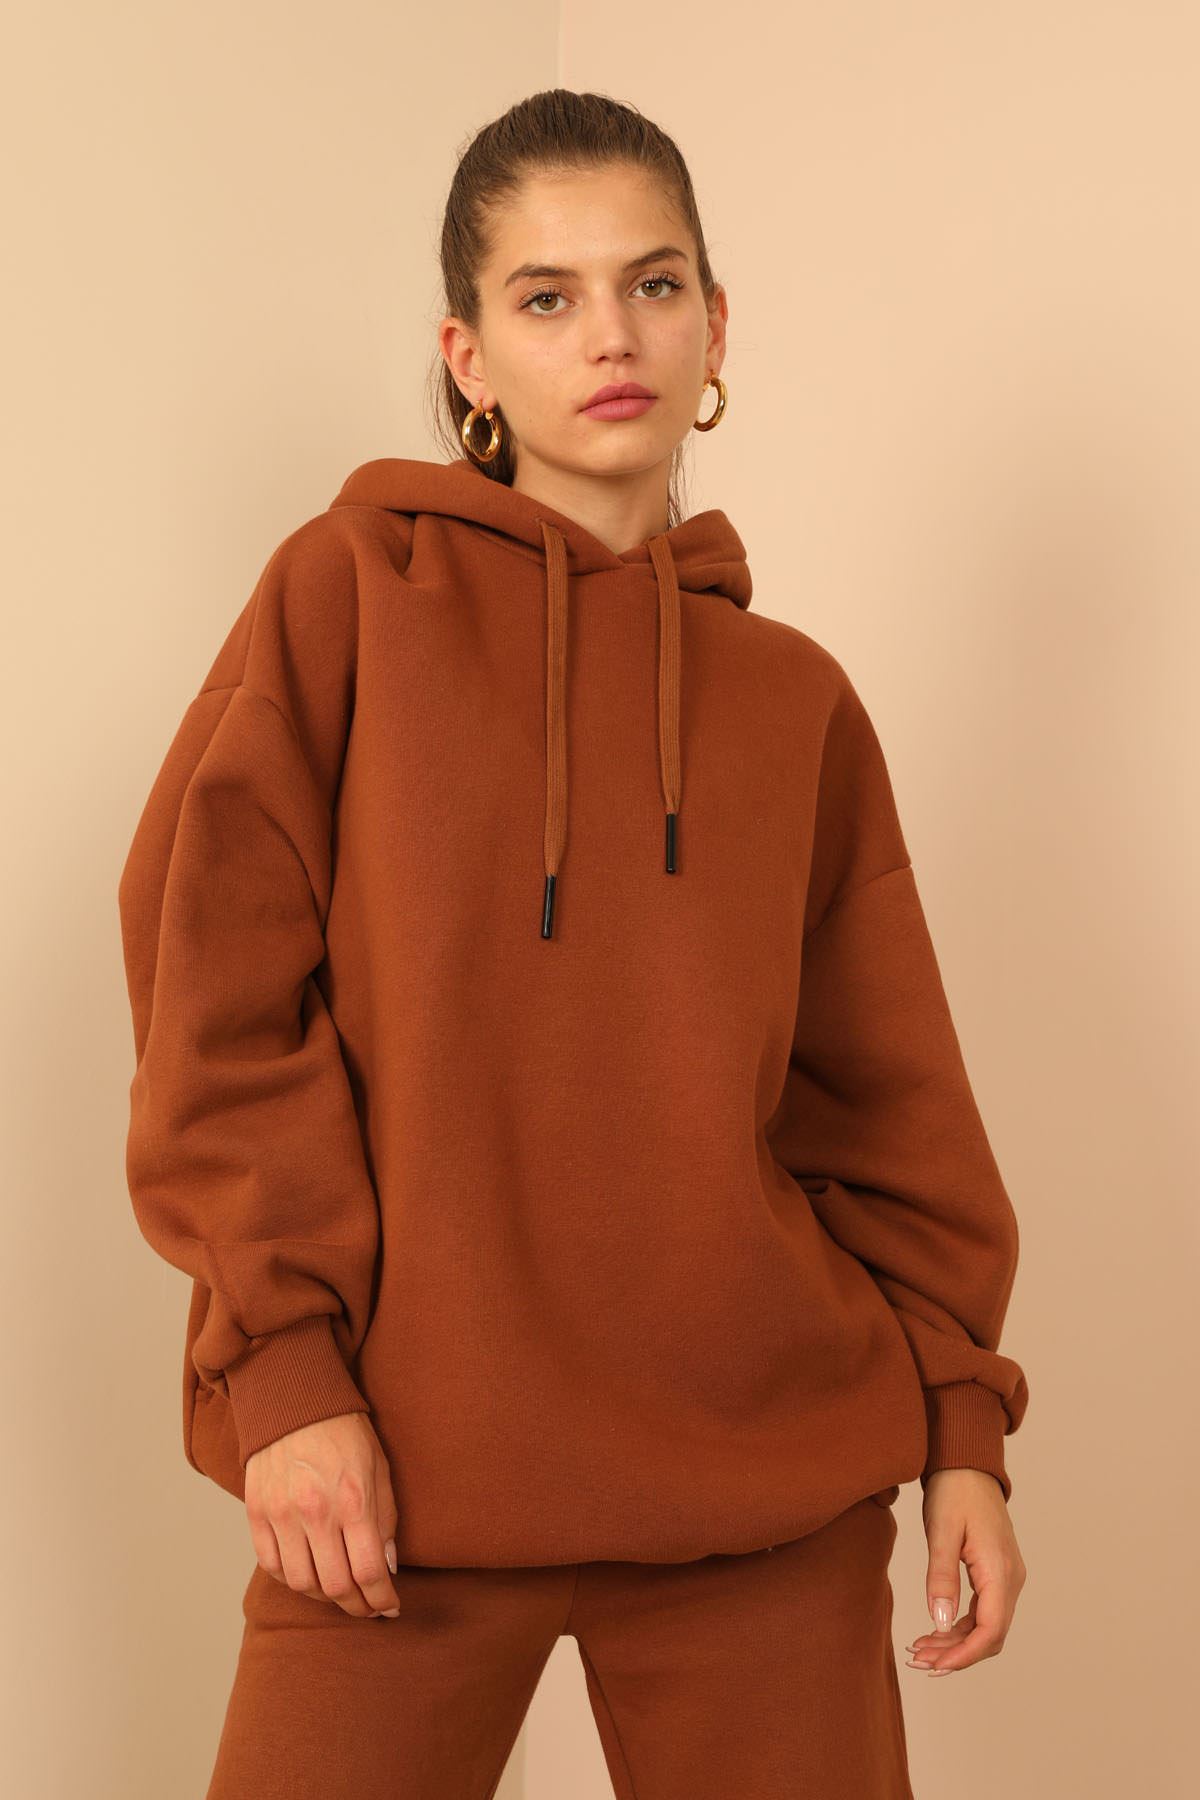 Third Knit With Wool İnside Fabric Hooded Hip Height Oversize Women Sweatshirt - Brown